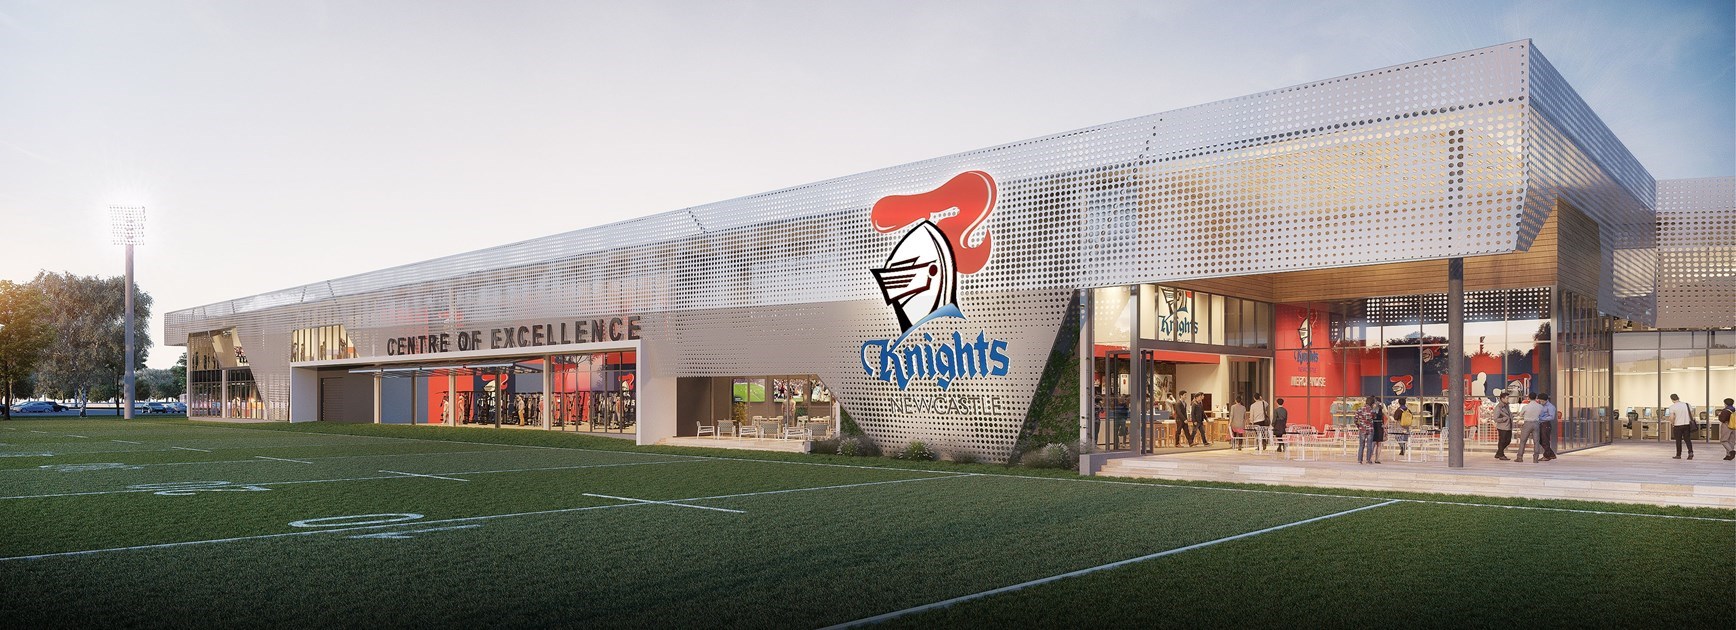 Knights' $20m centre of excellence on track for 2020